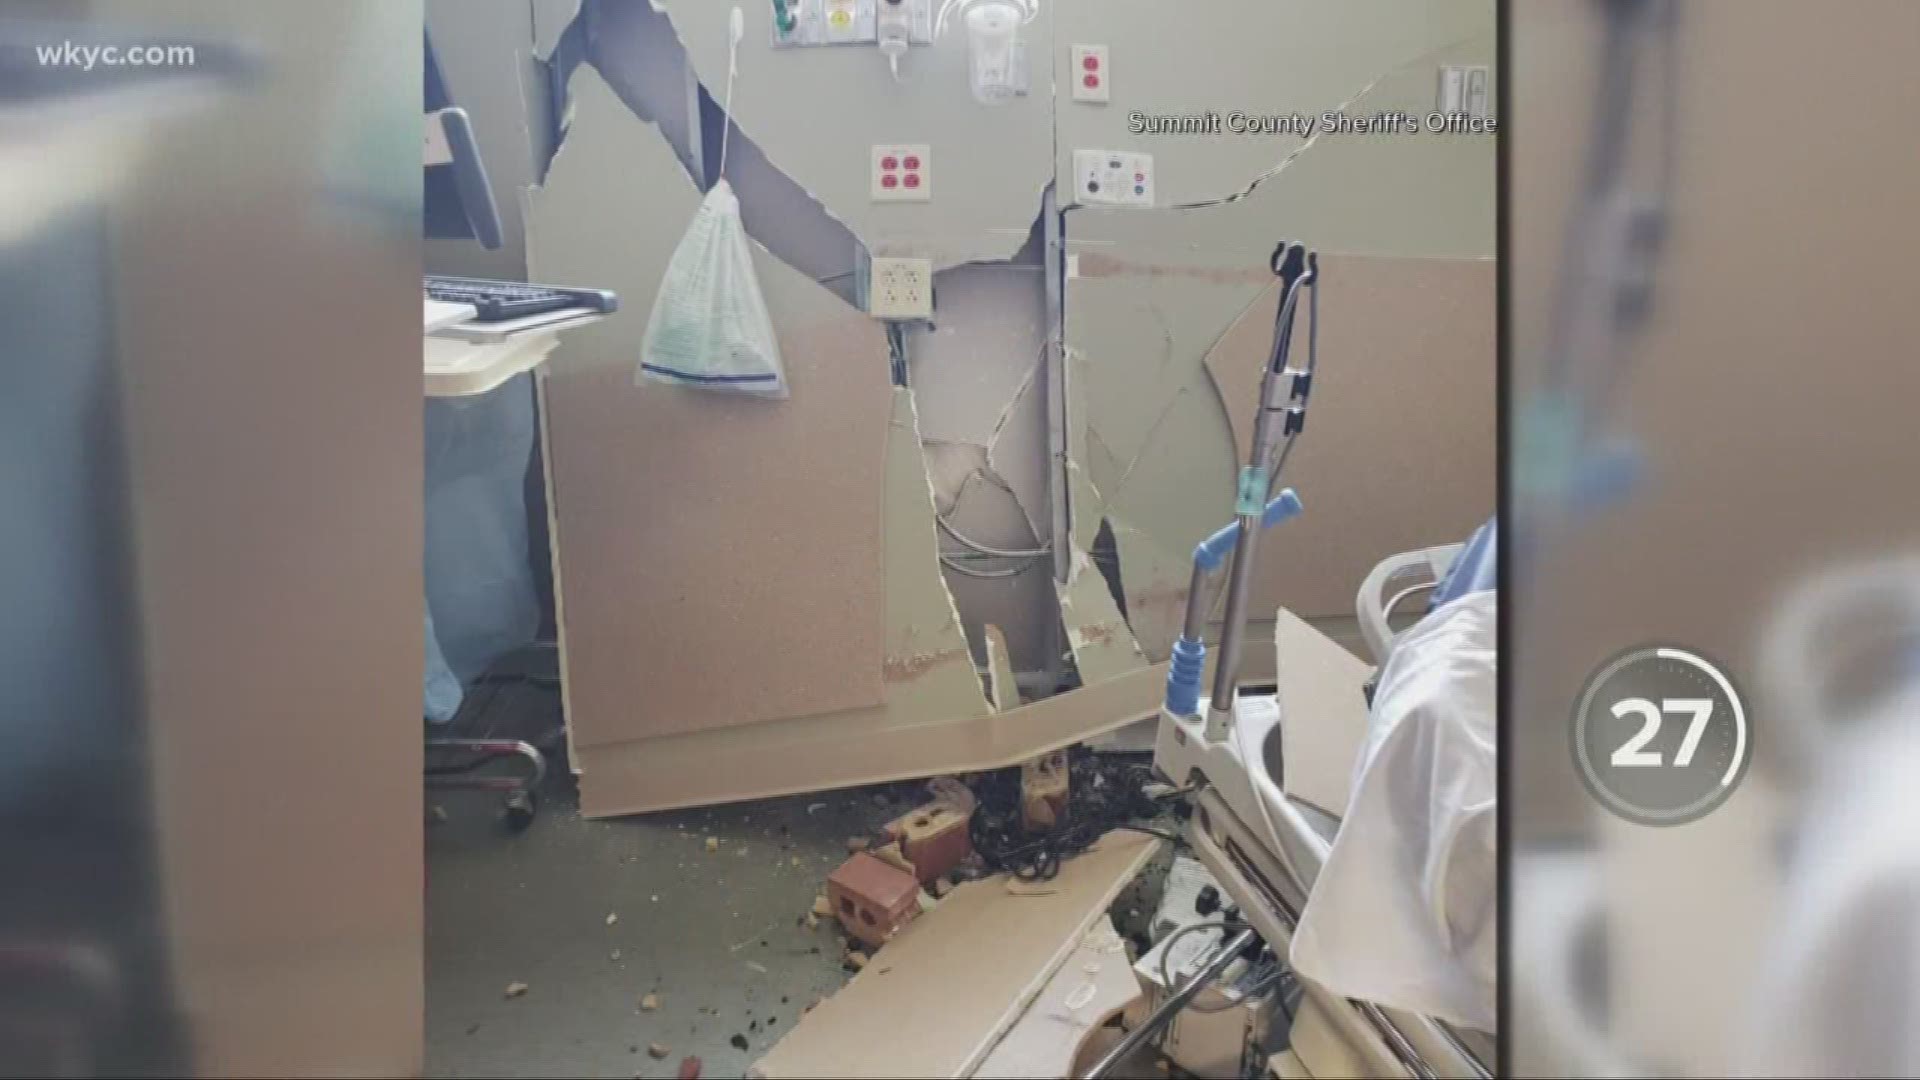 The vehicle struck the hospital and crashed into an exam room that was occupied by a female patient and her husband. Both were treated for injuries.